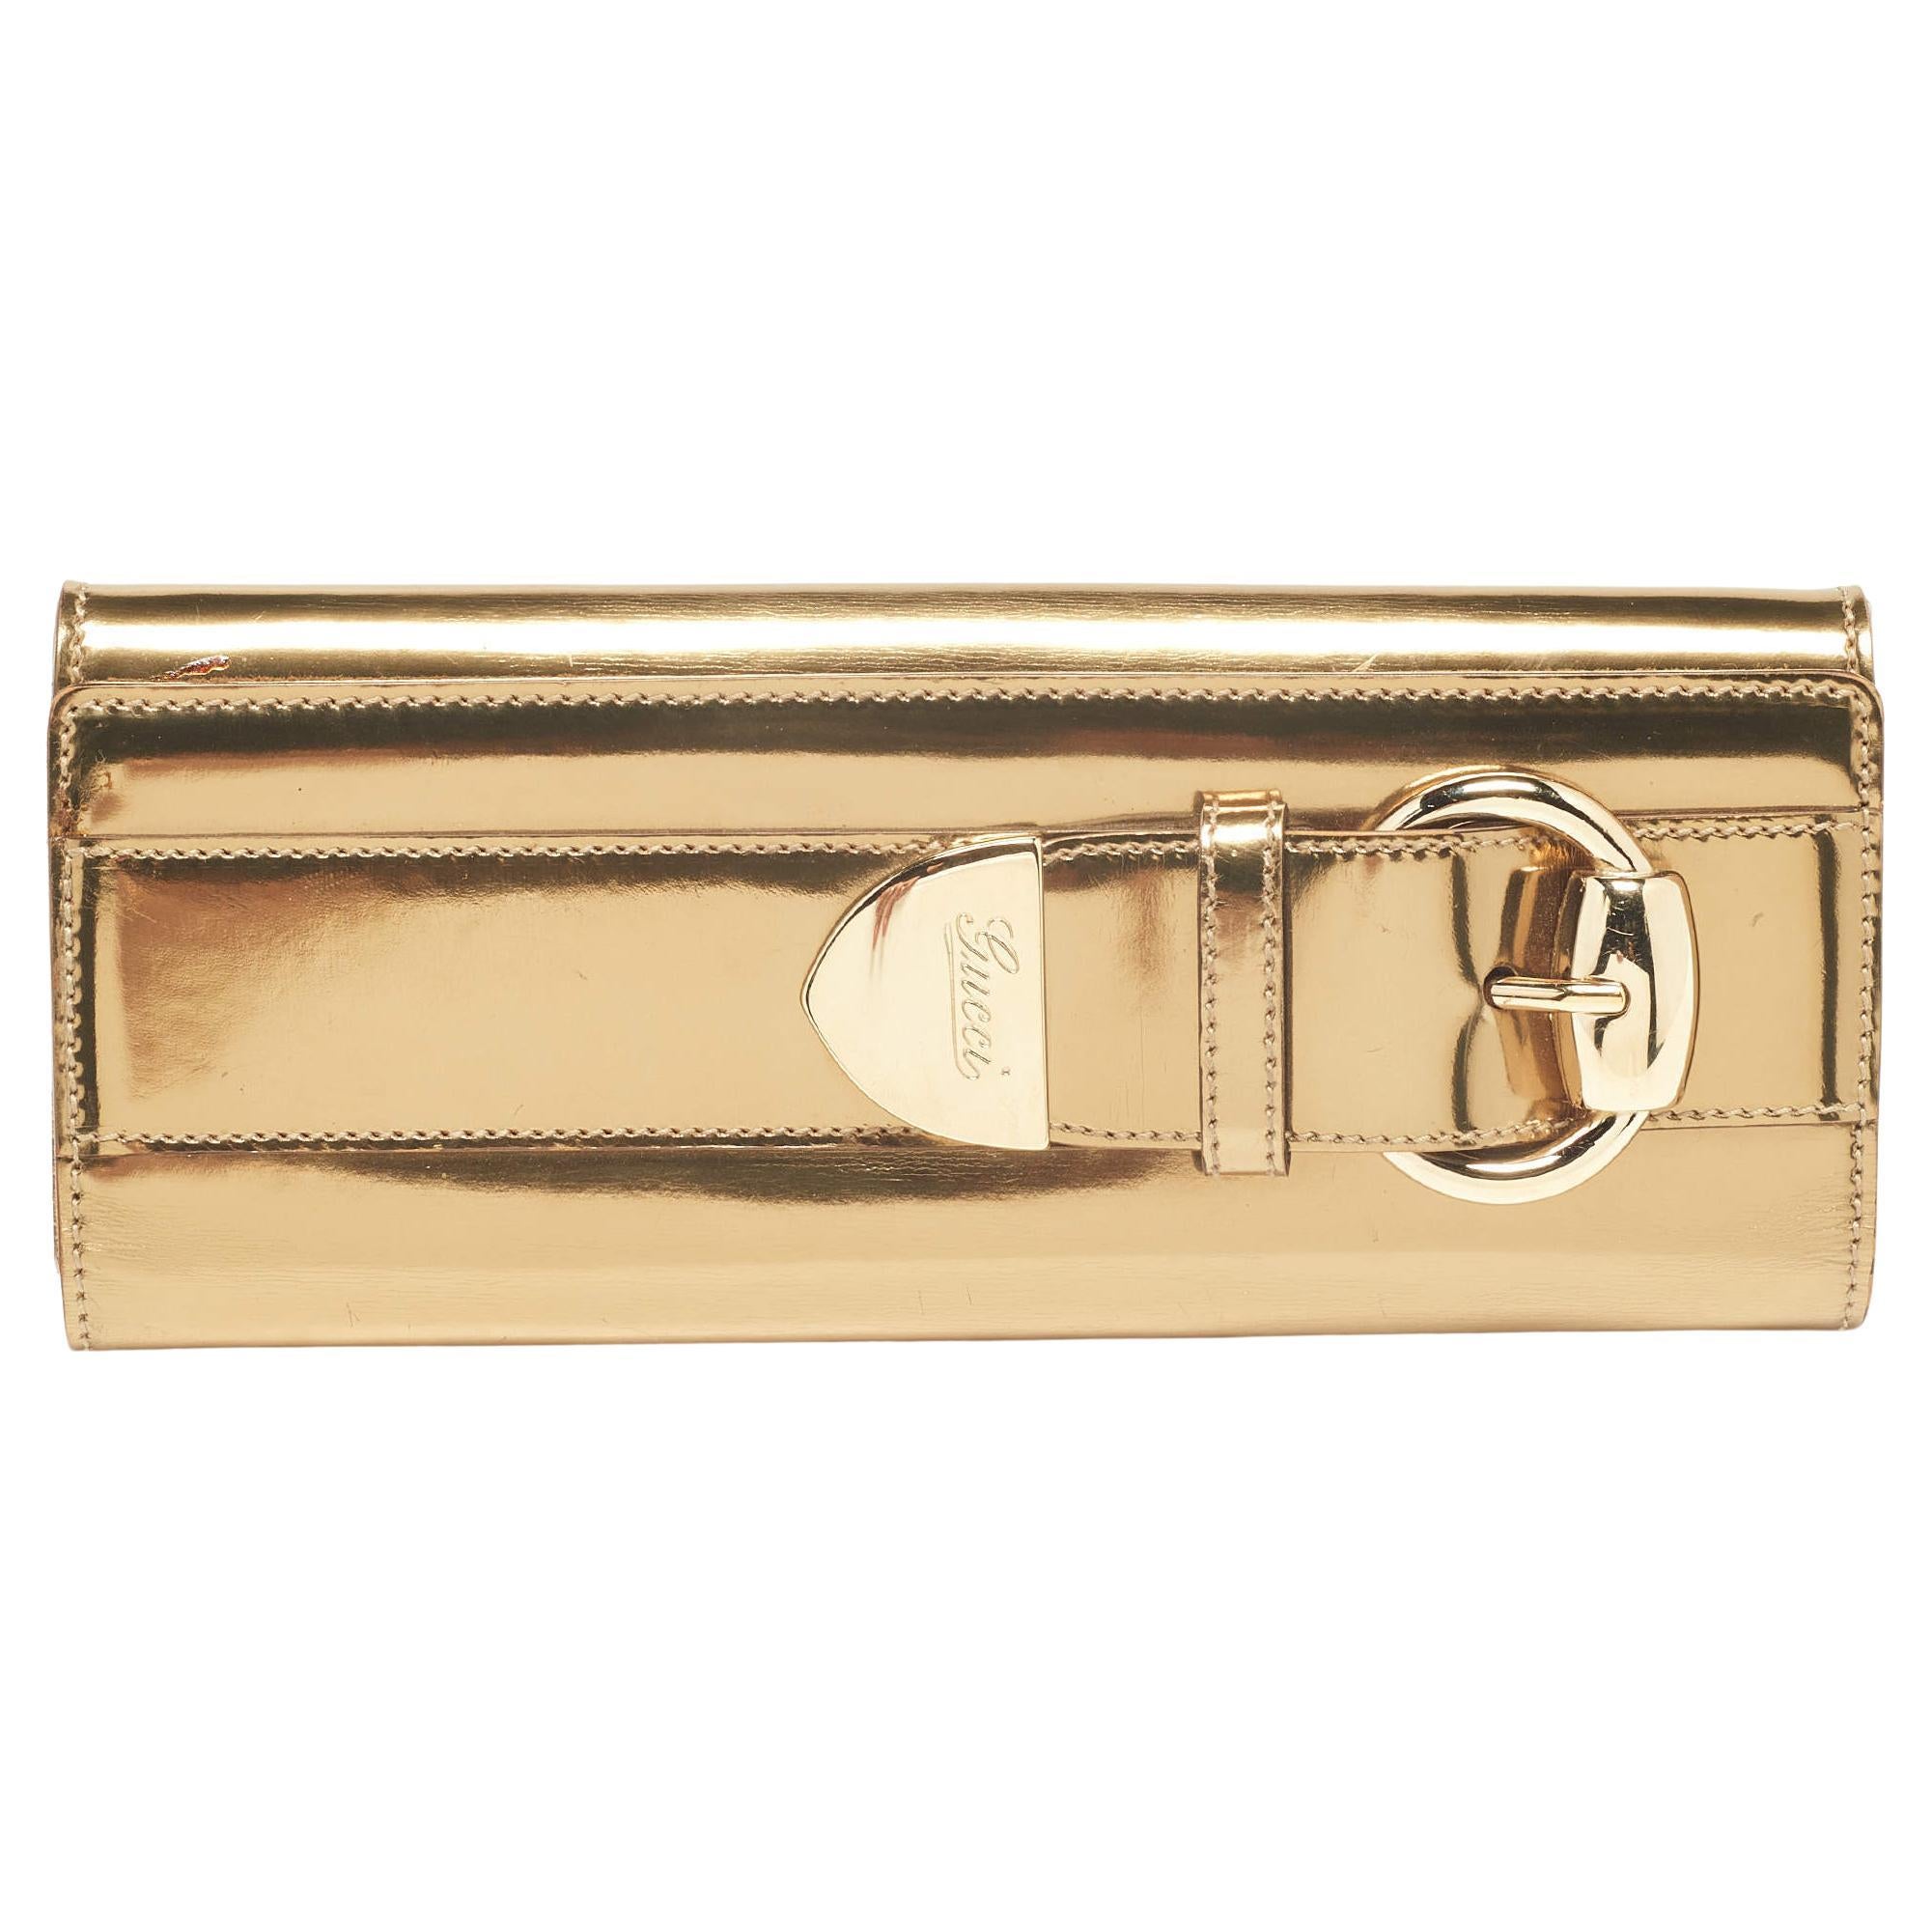 Gucci Gold Patent Leather Buckle Continental Wallet